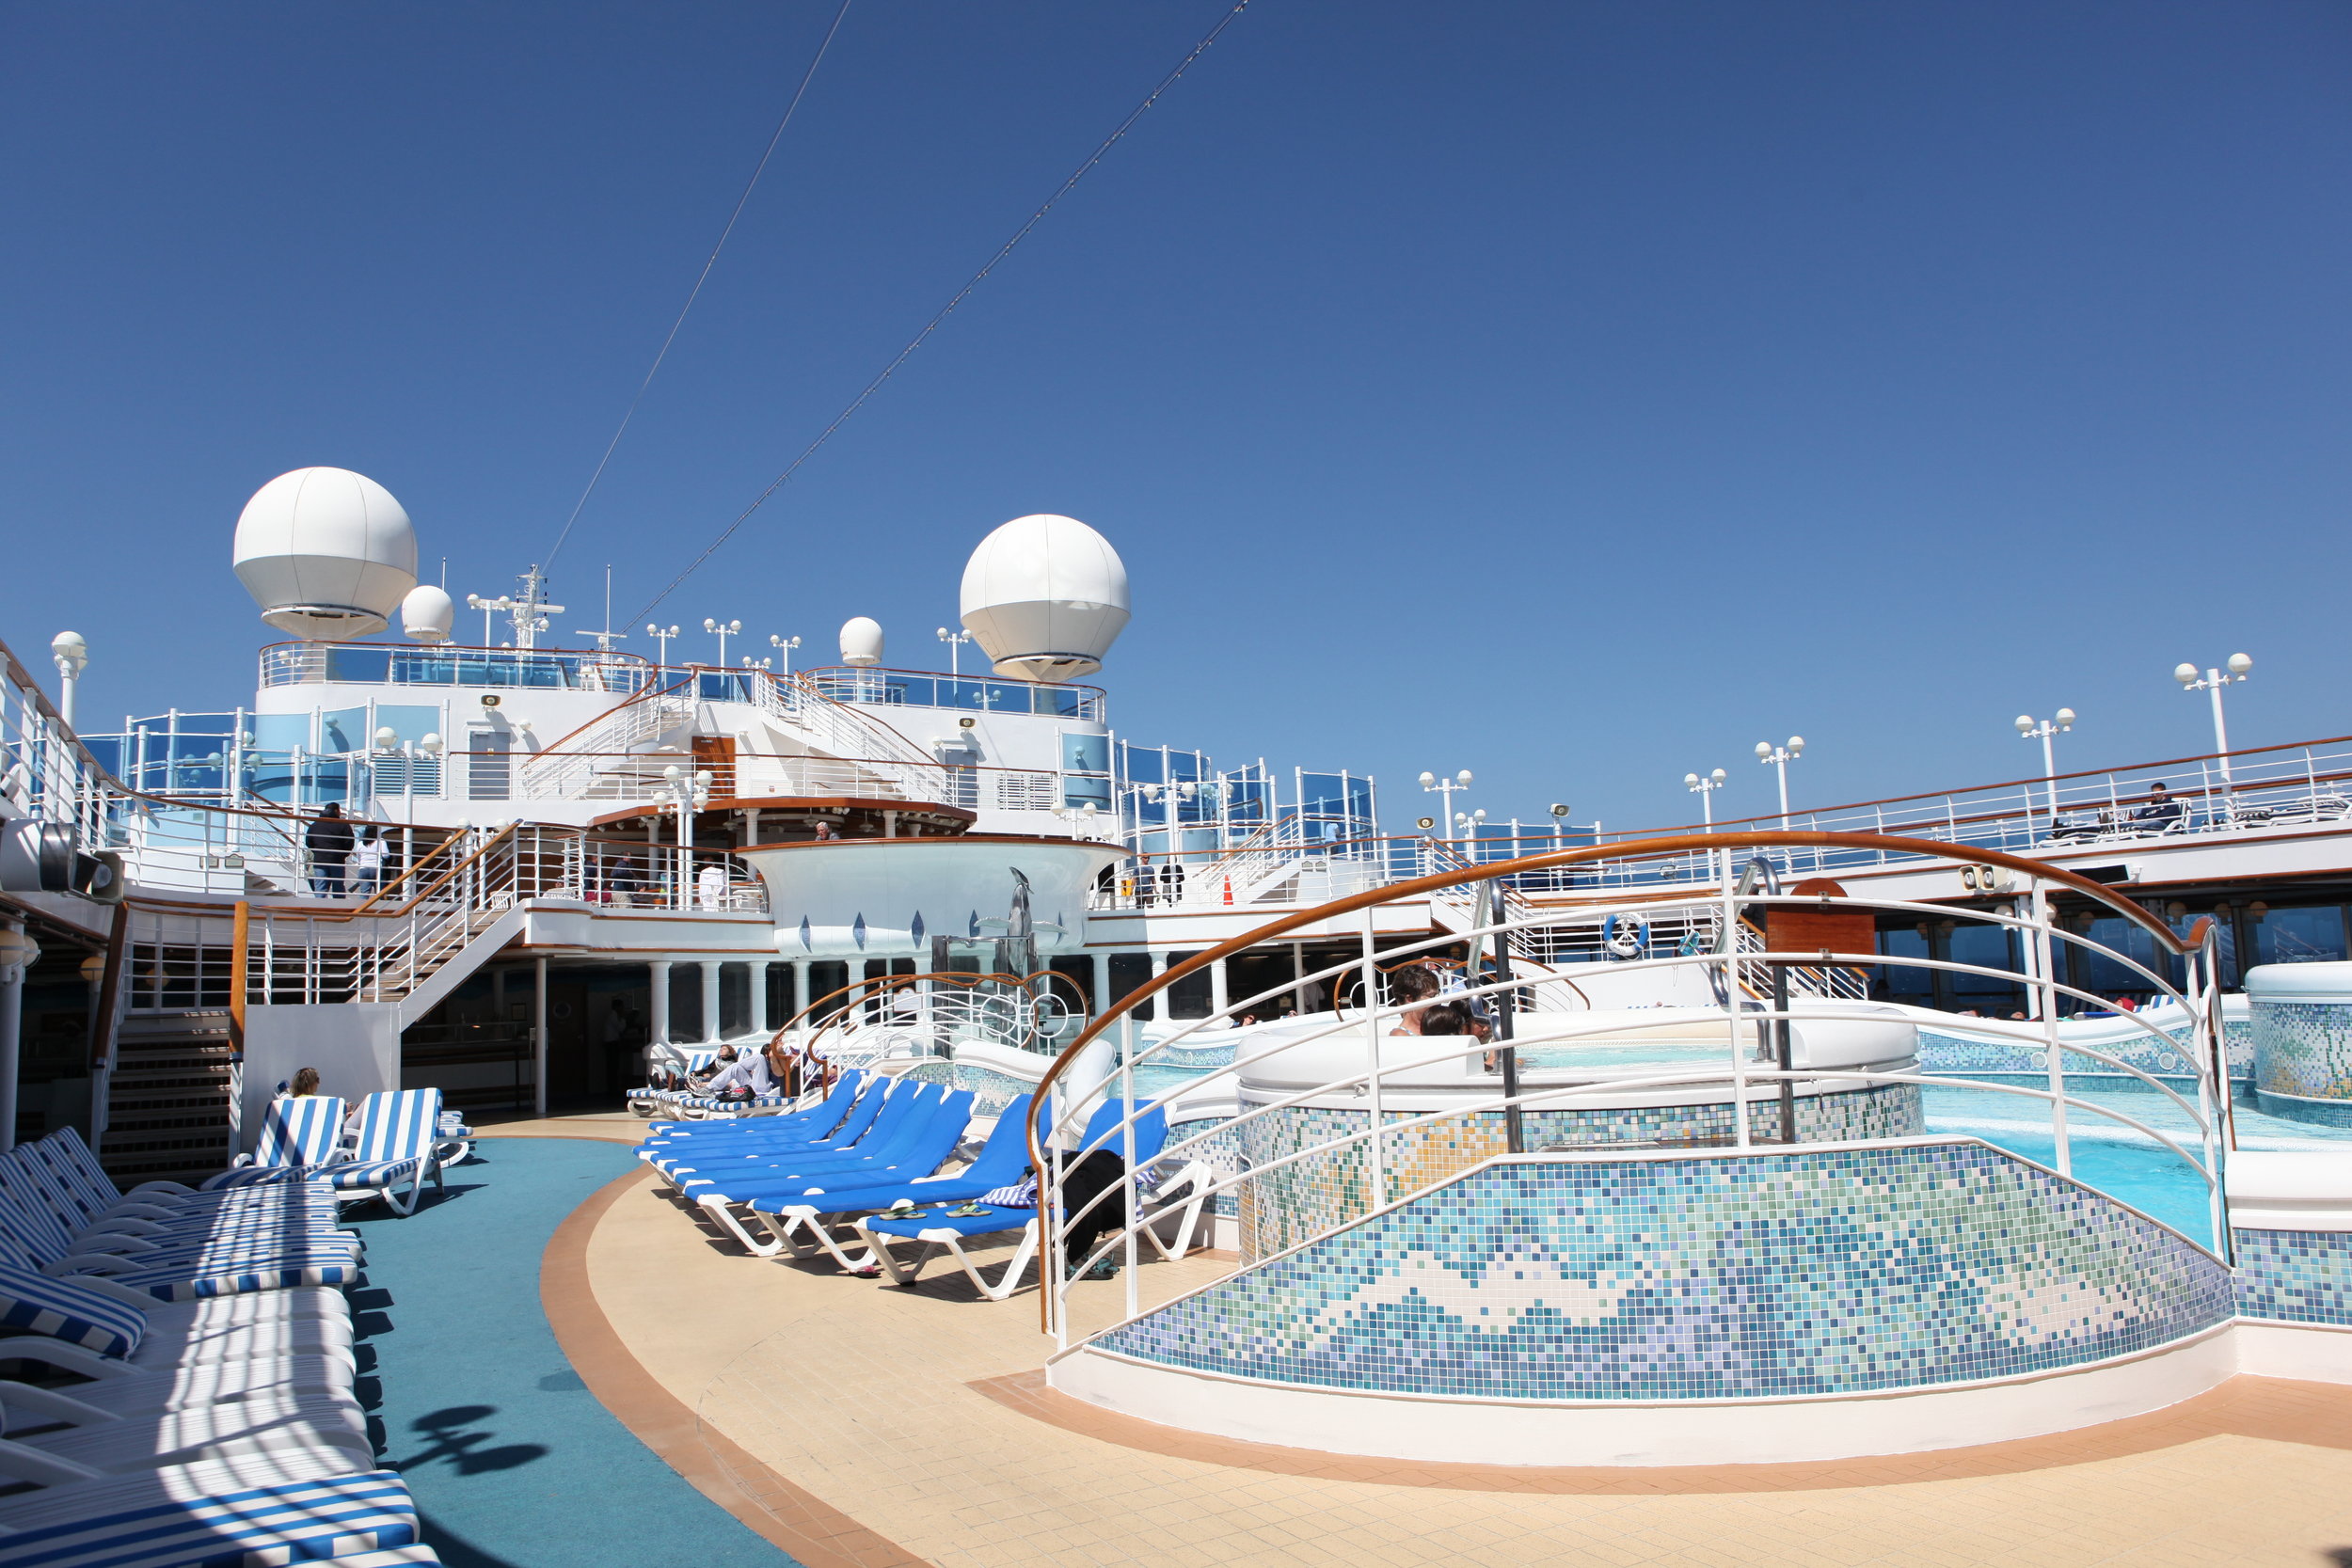  The pool area onboard. The large circular globes on the top of the ship are radars, integral to the geolocation and operation of the ship.&nbsp; 